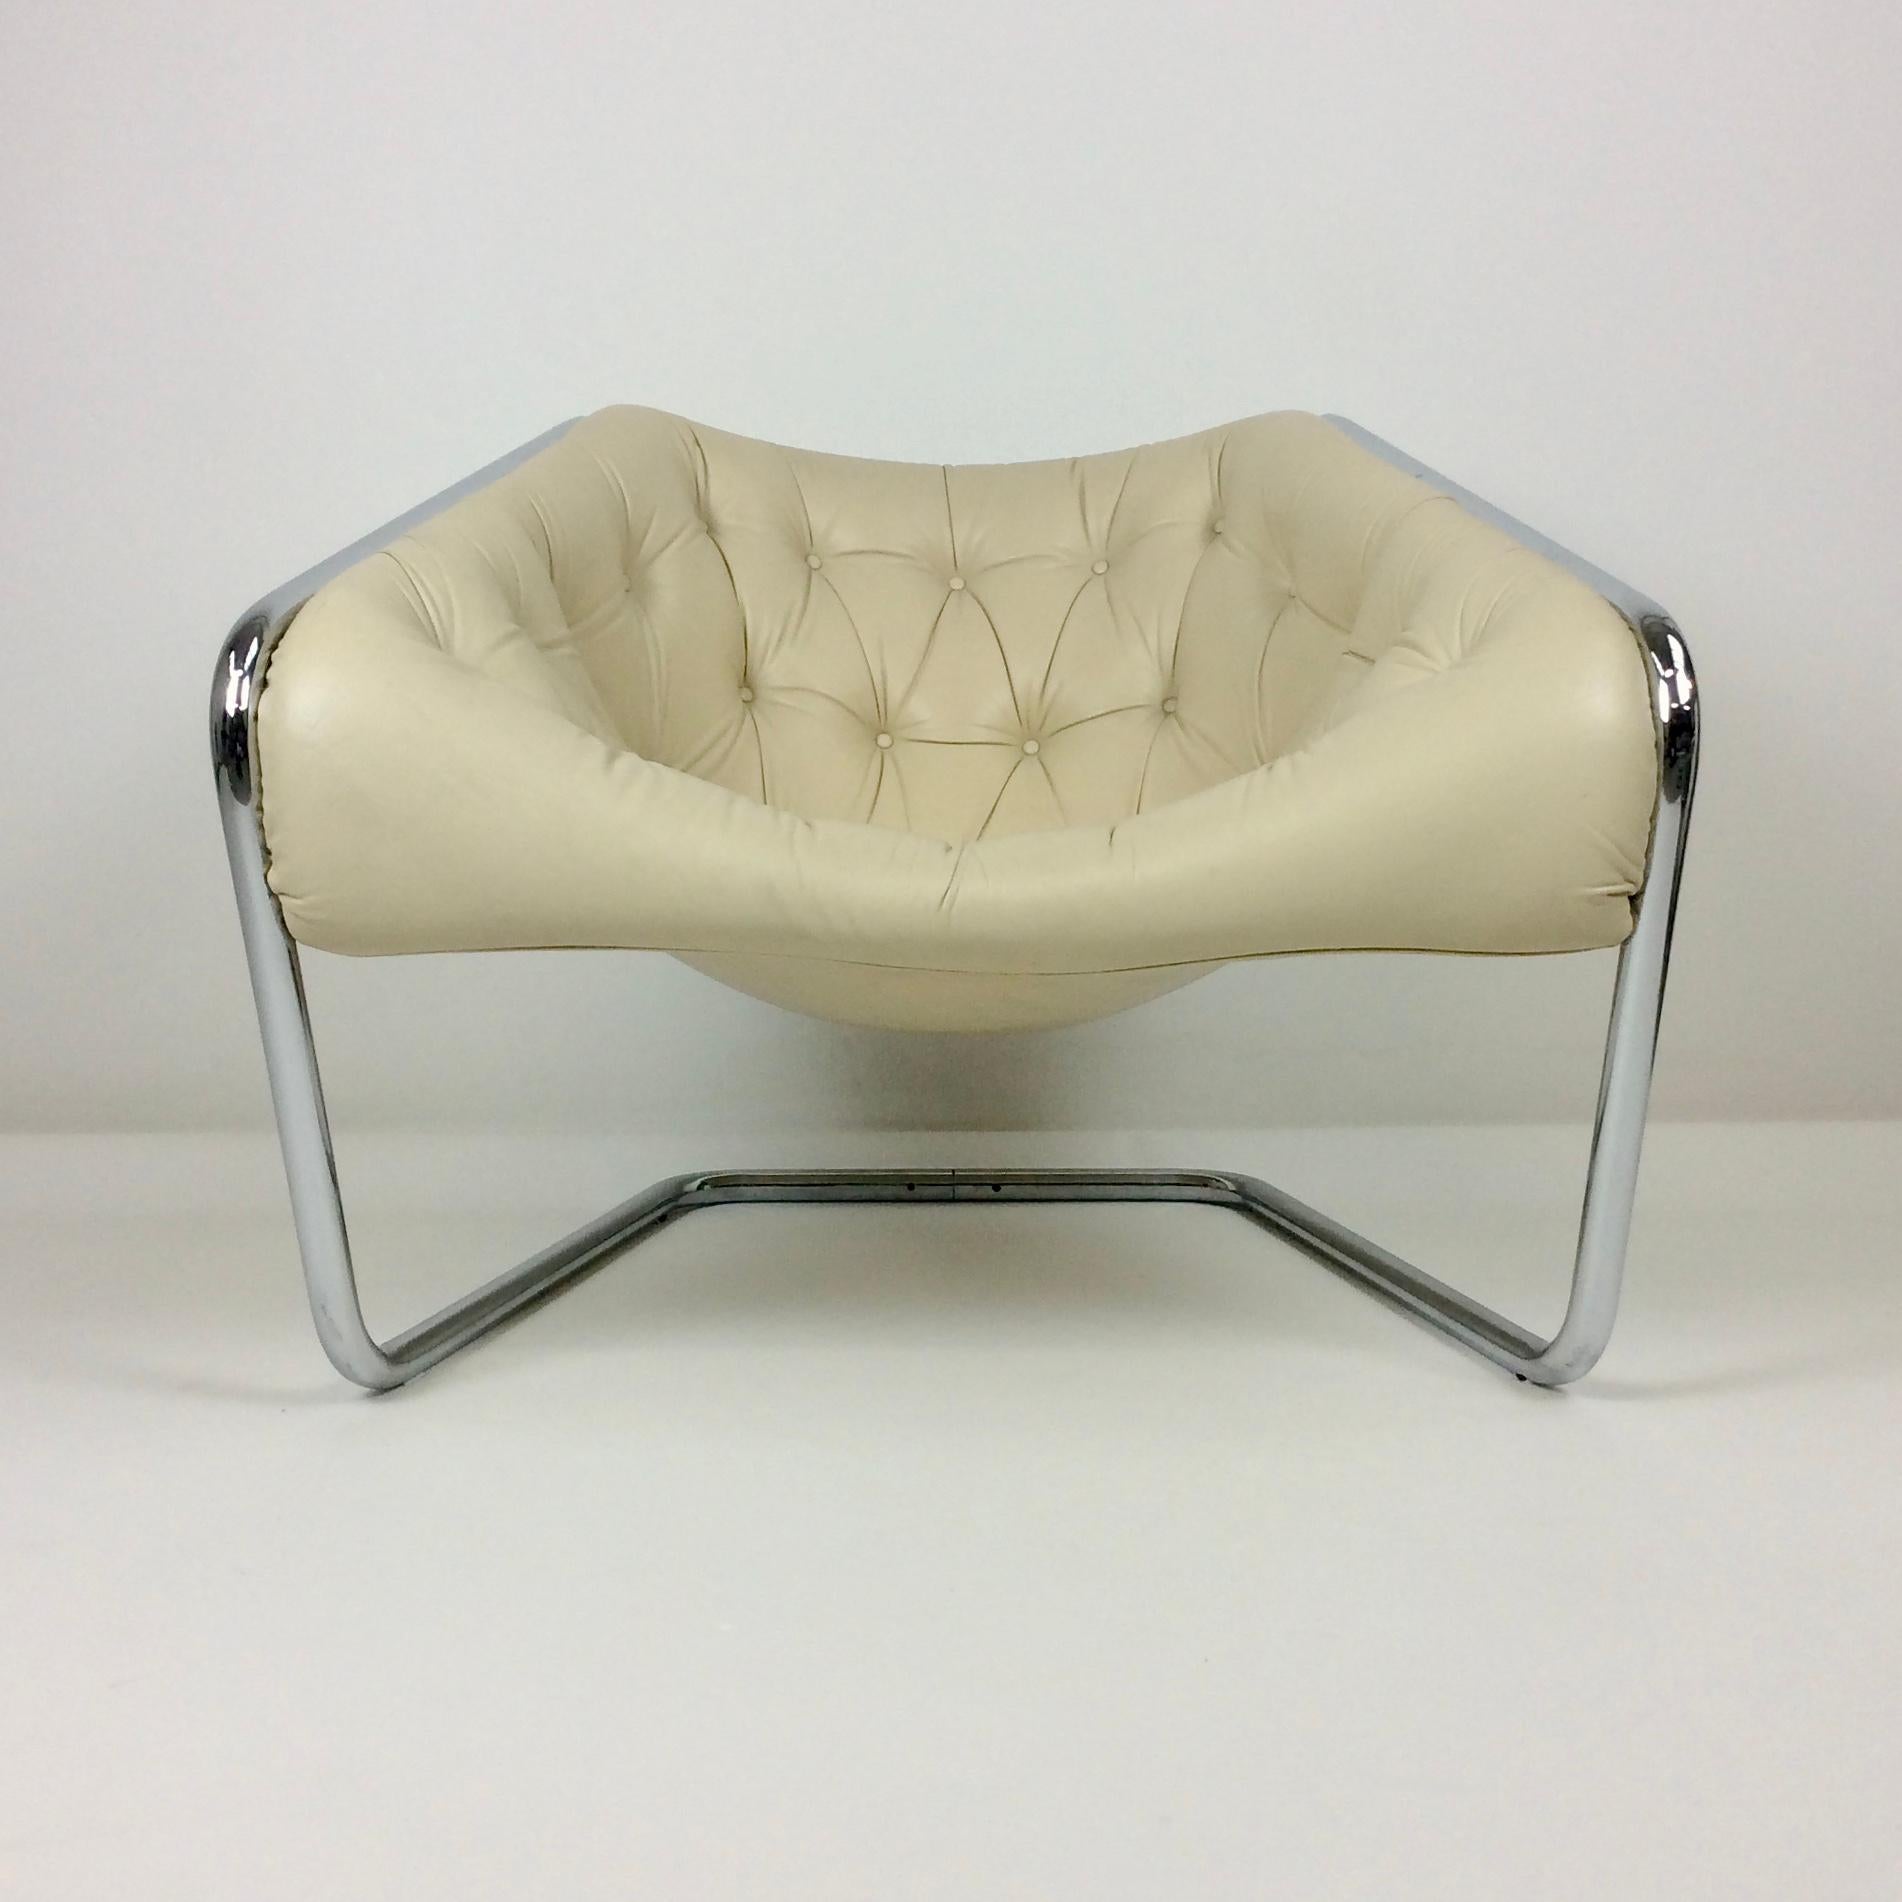 Mid-Century Modern Kwok Hoi Chan Boxer Leather Lounge Chair for Steiner, circa 1971, France